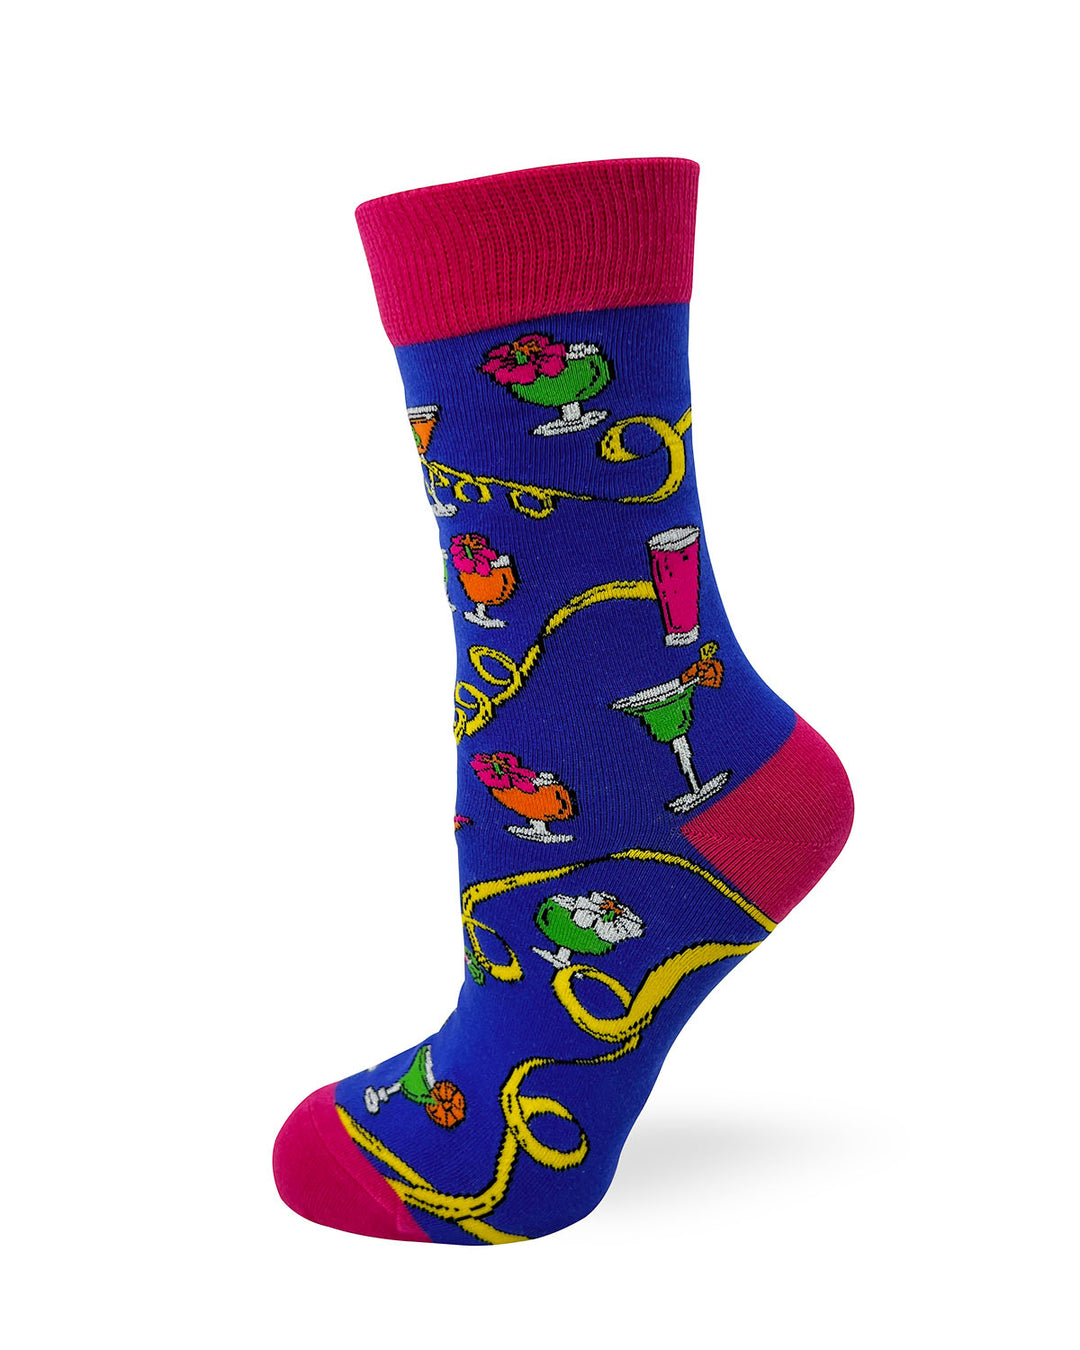 Funny "You Had Me at Day Drinking" Women's Crew Socks